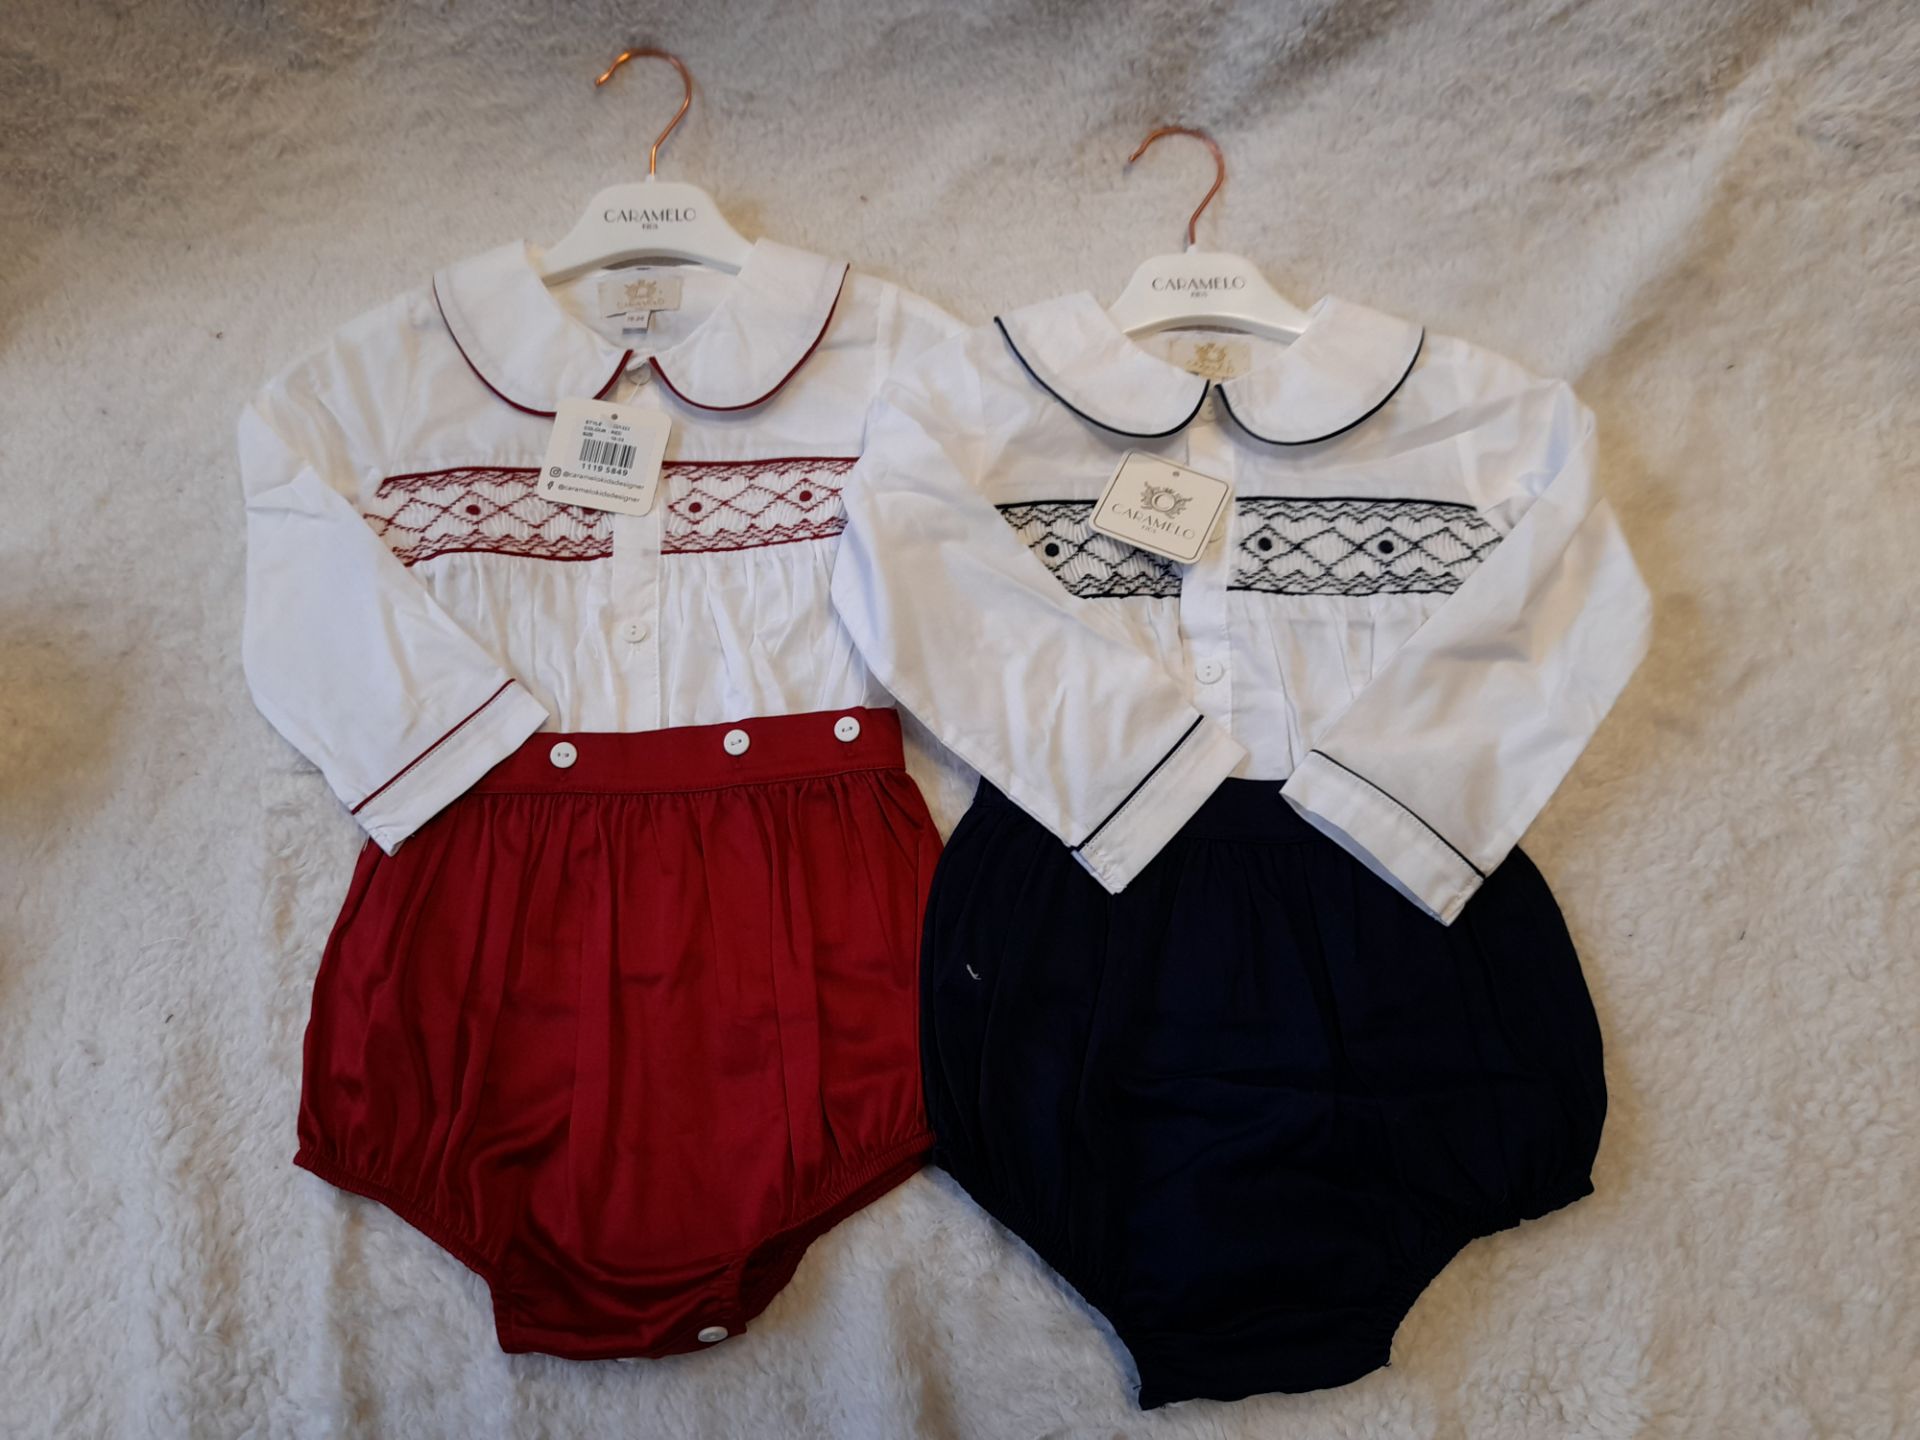 2 x Caramelo Kids Shirt/ Romper, Navy & Red, both - Image 2 of 4